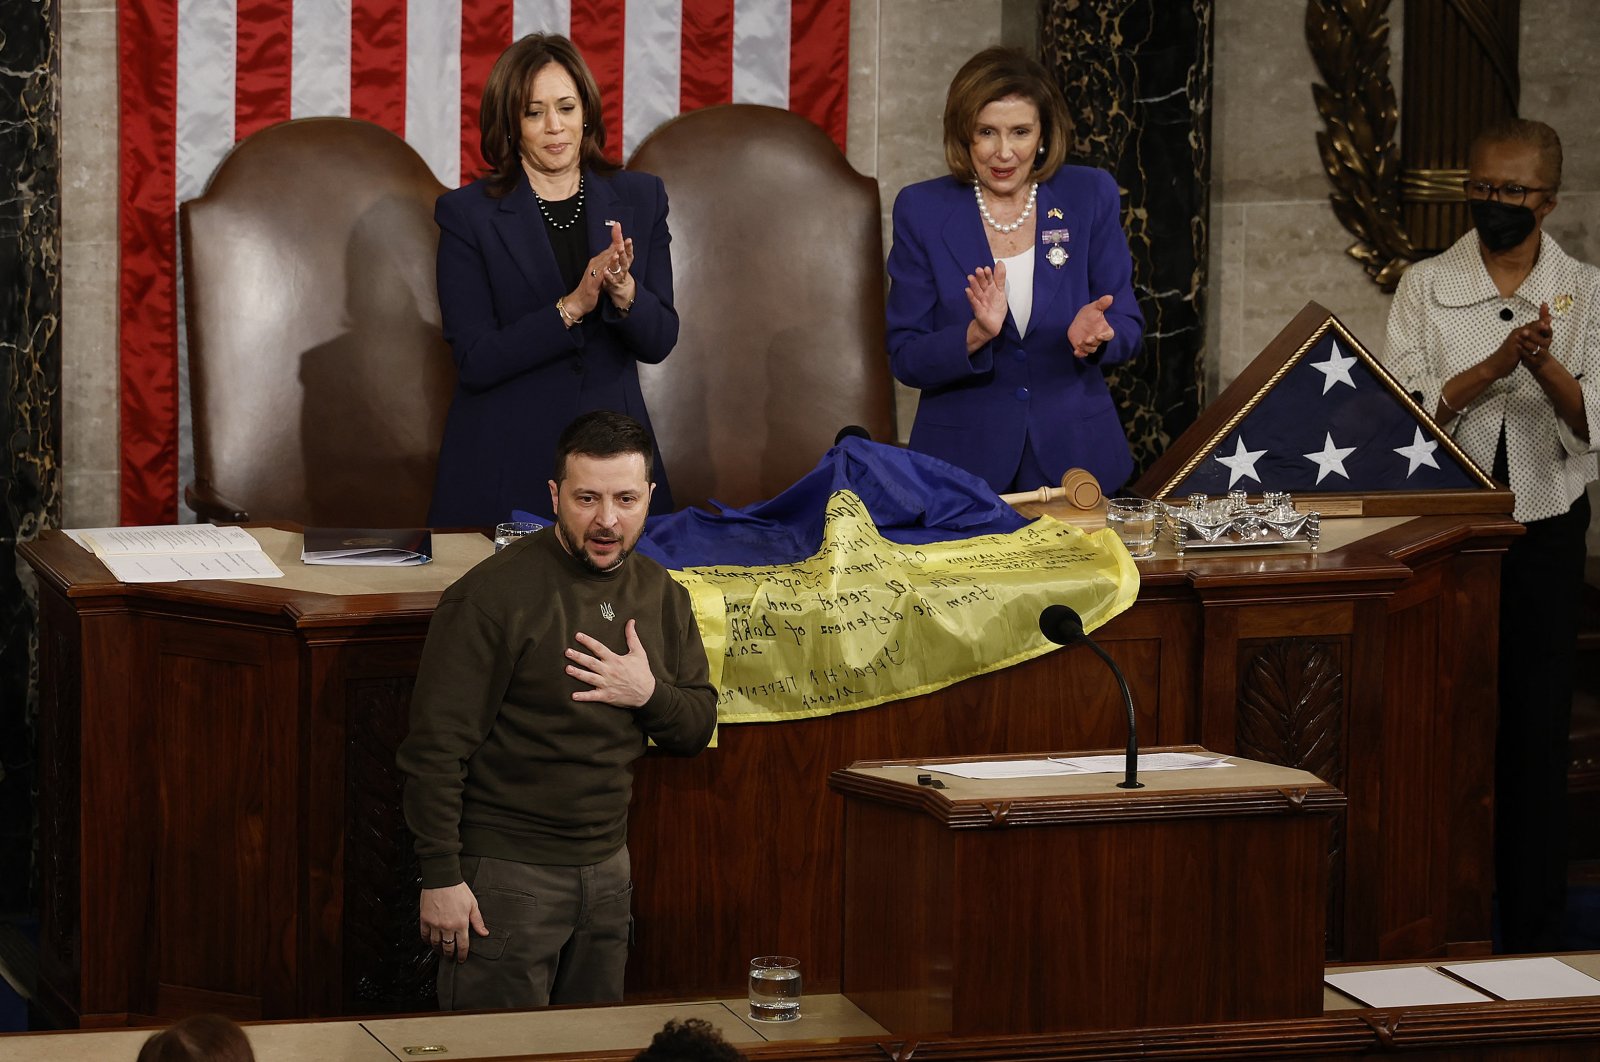 Ukraine President Volodymyr Zelenskyy (L) thanks members of Congress after presenting a flag signed by Ukrainian troops to U.S. House Speaker Nancy Pelosi (2nd R) and Vice President Kamala Harris (C) during a joint meeting of Congress, Washington, D.C., U.S., Dec. 21, 2022. (AFP Photo)